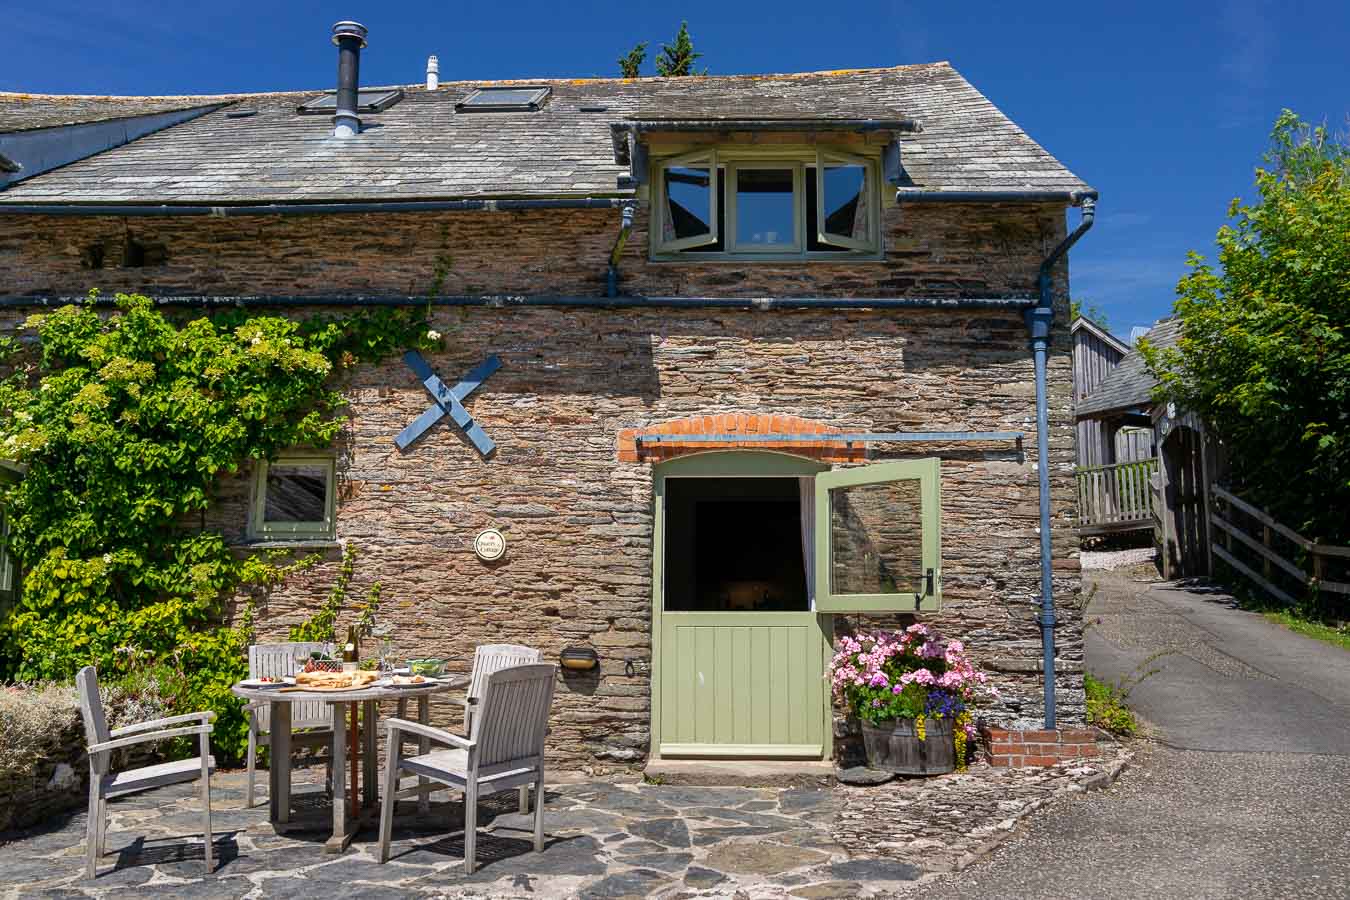 Quarry, holiday cottage with access to large indoor pool. Sleeps 4 people. Flear Farm, Devon.